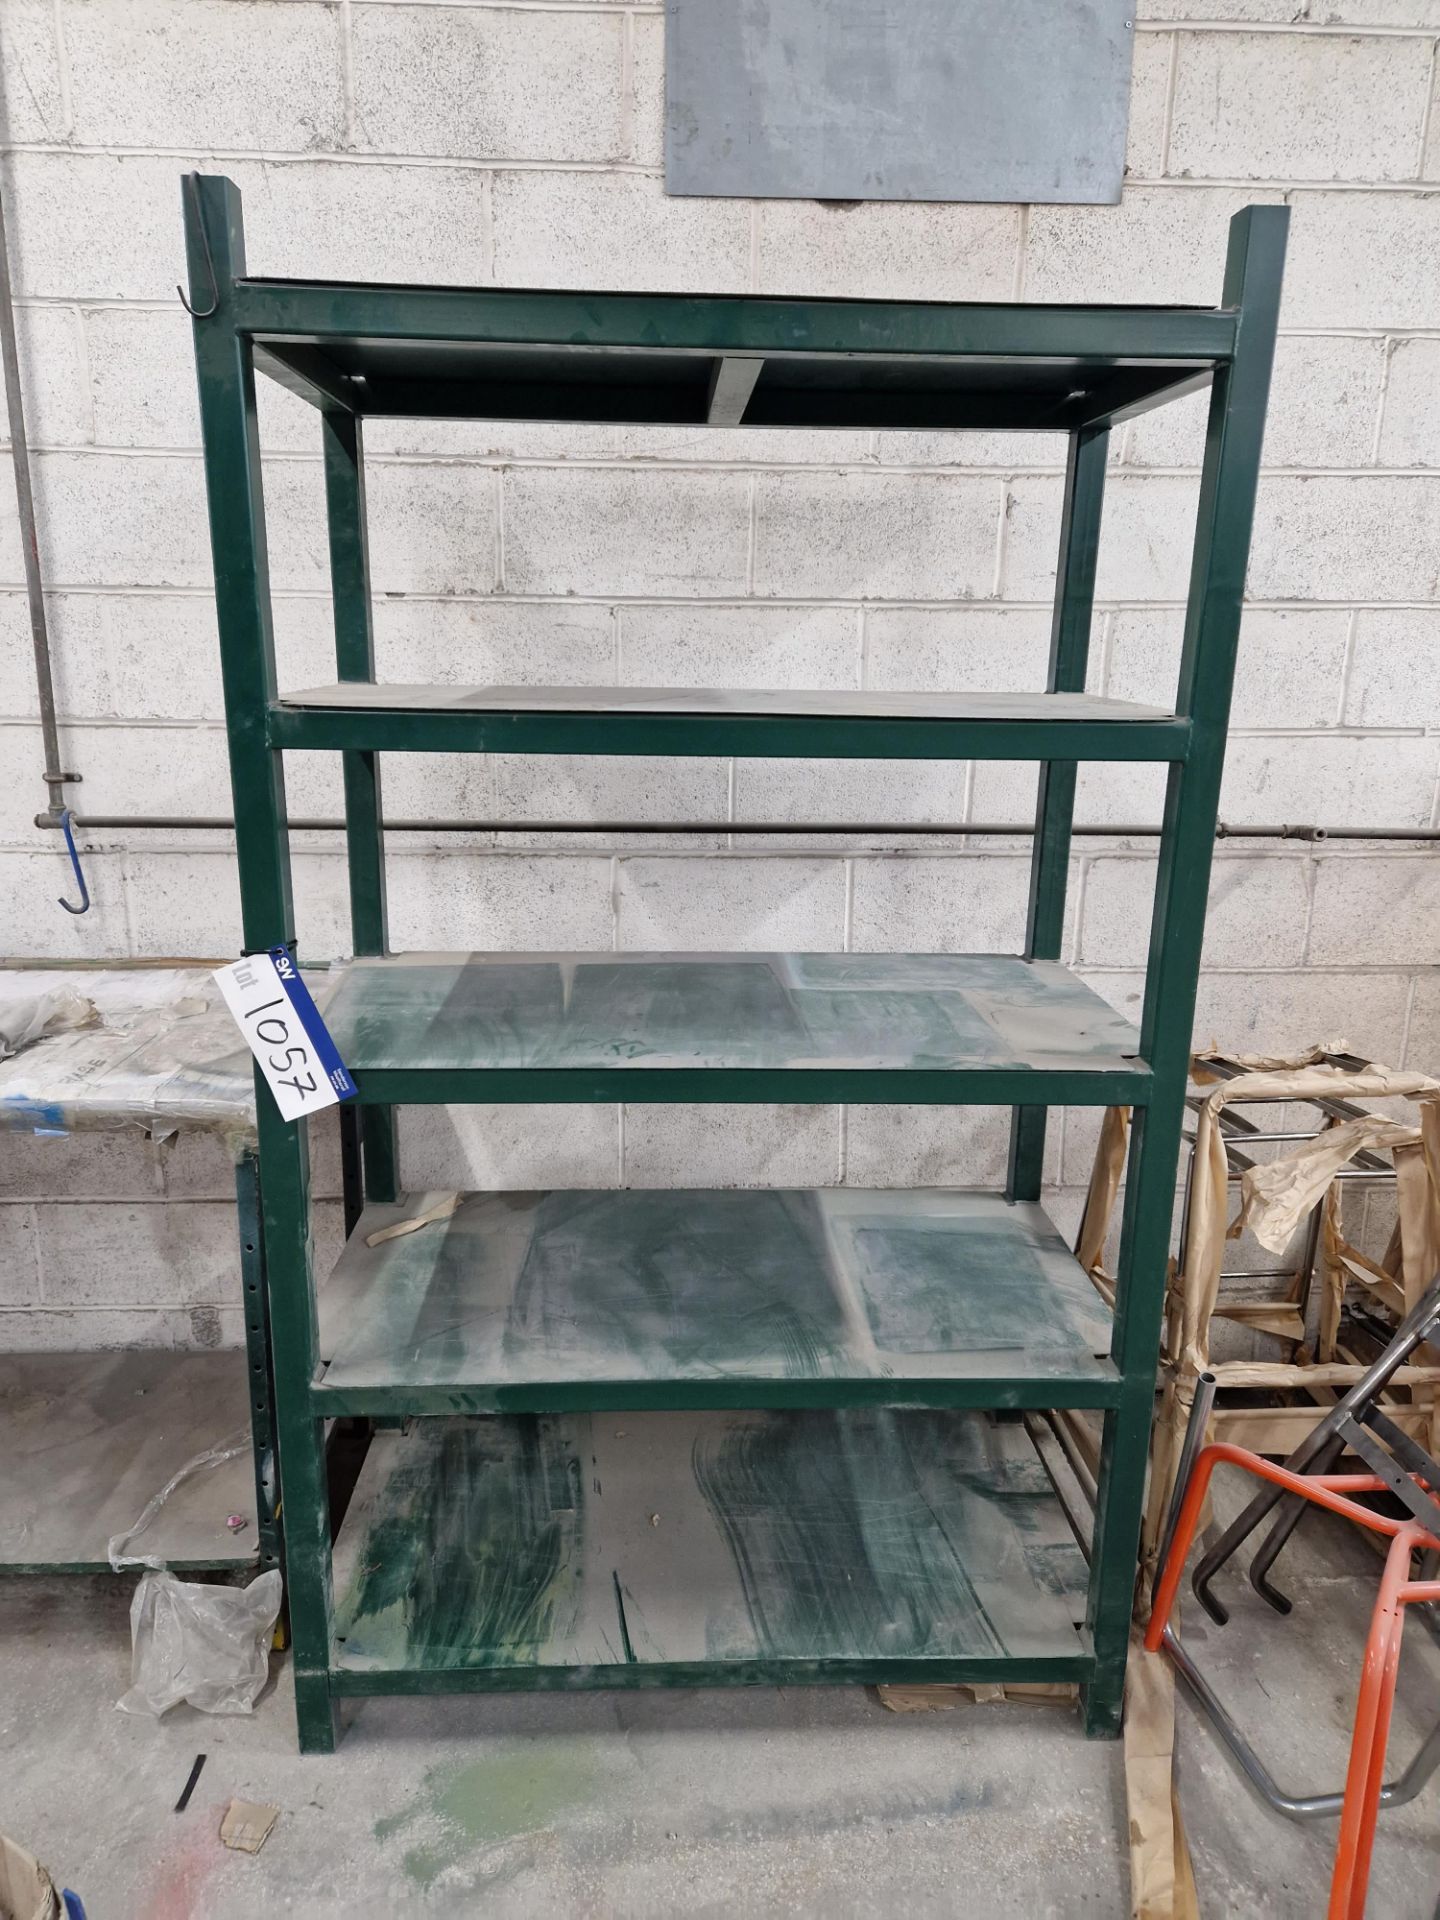 Steel Framed 5 Tier Shelving Unit, Approx. 1.2m x 0.6m x 2m Please read the following important